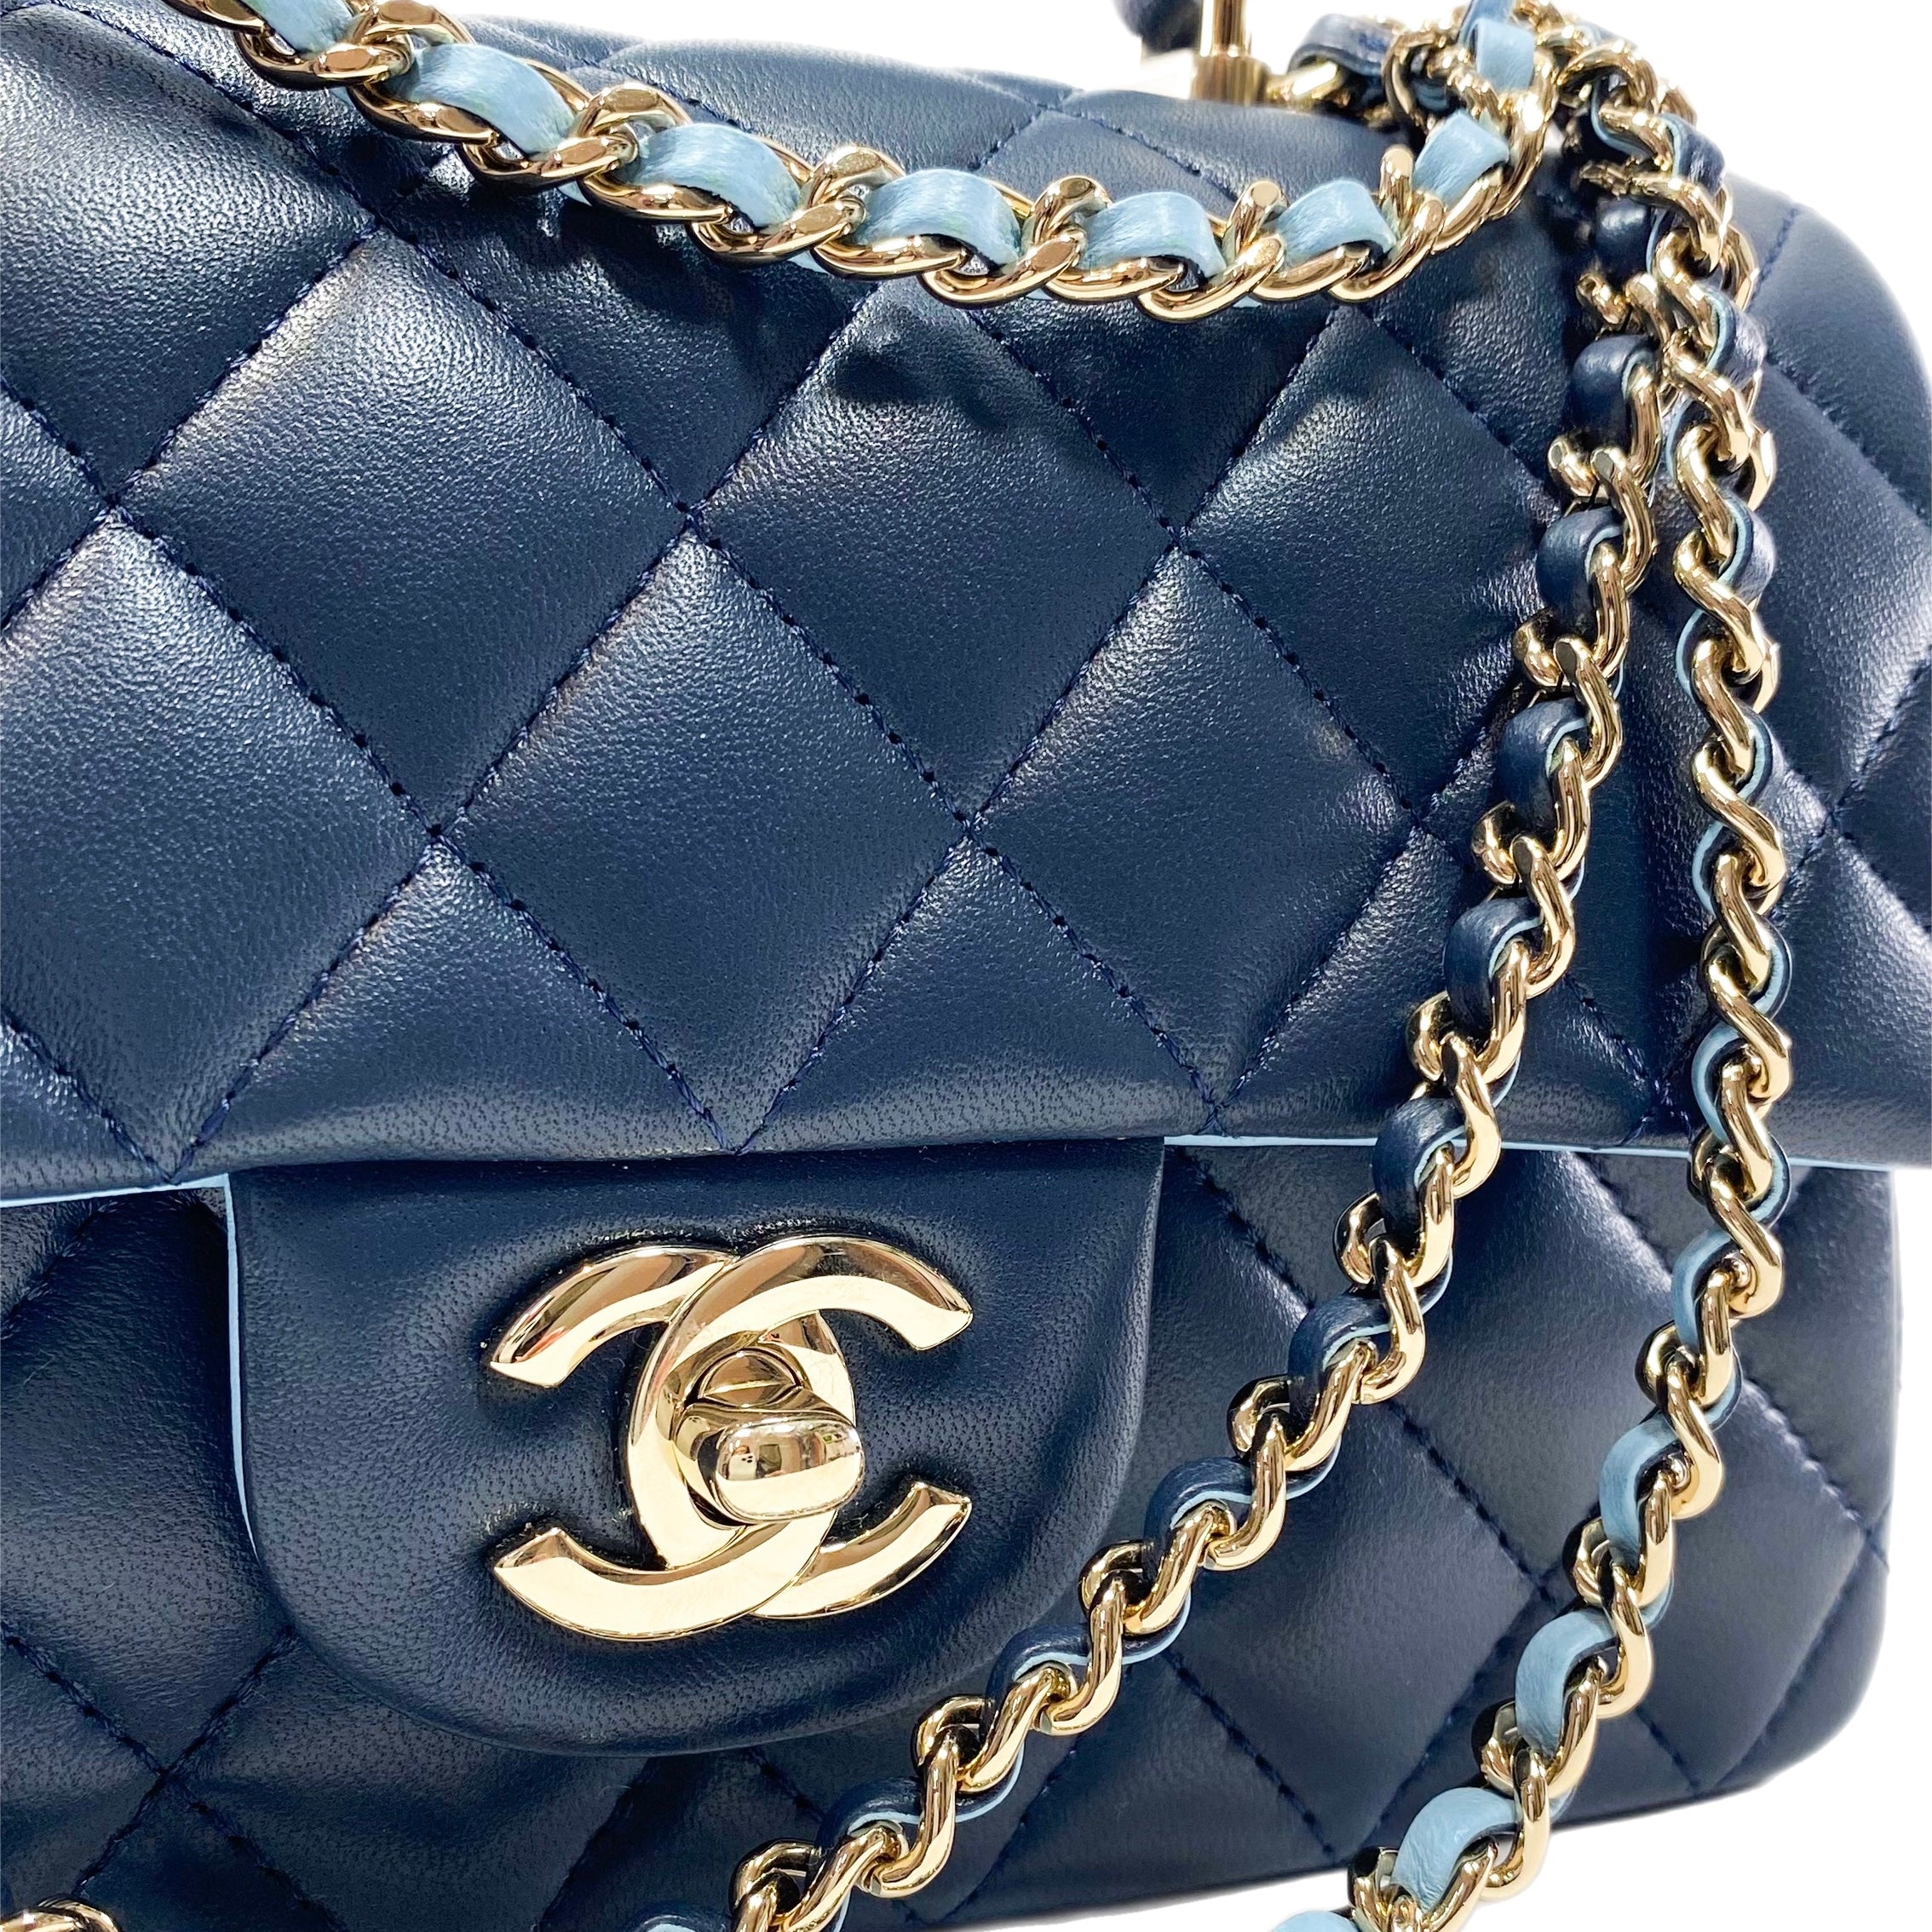 Chanel Quilted Lambskin Bi-Color Navy and Light Blue Mini Top